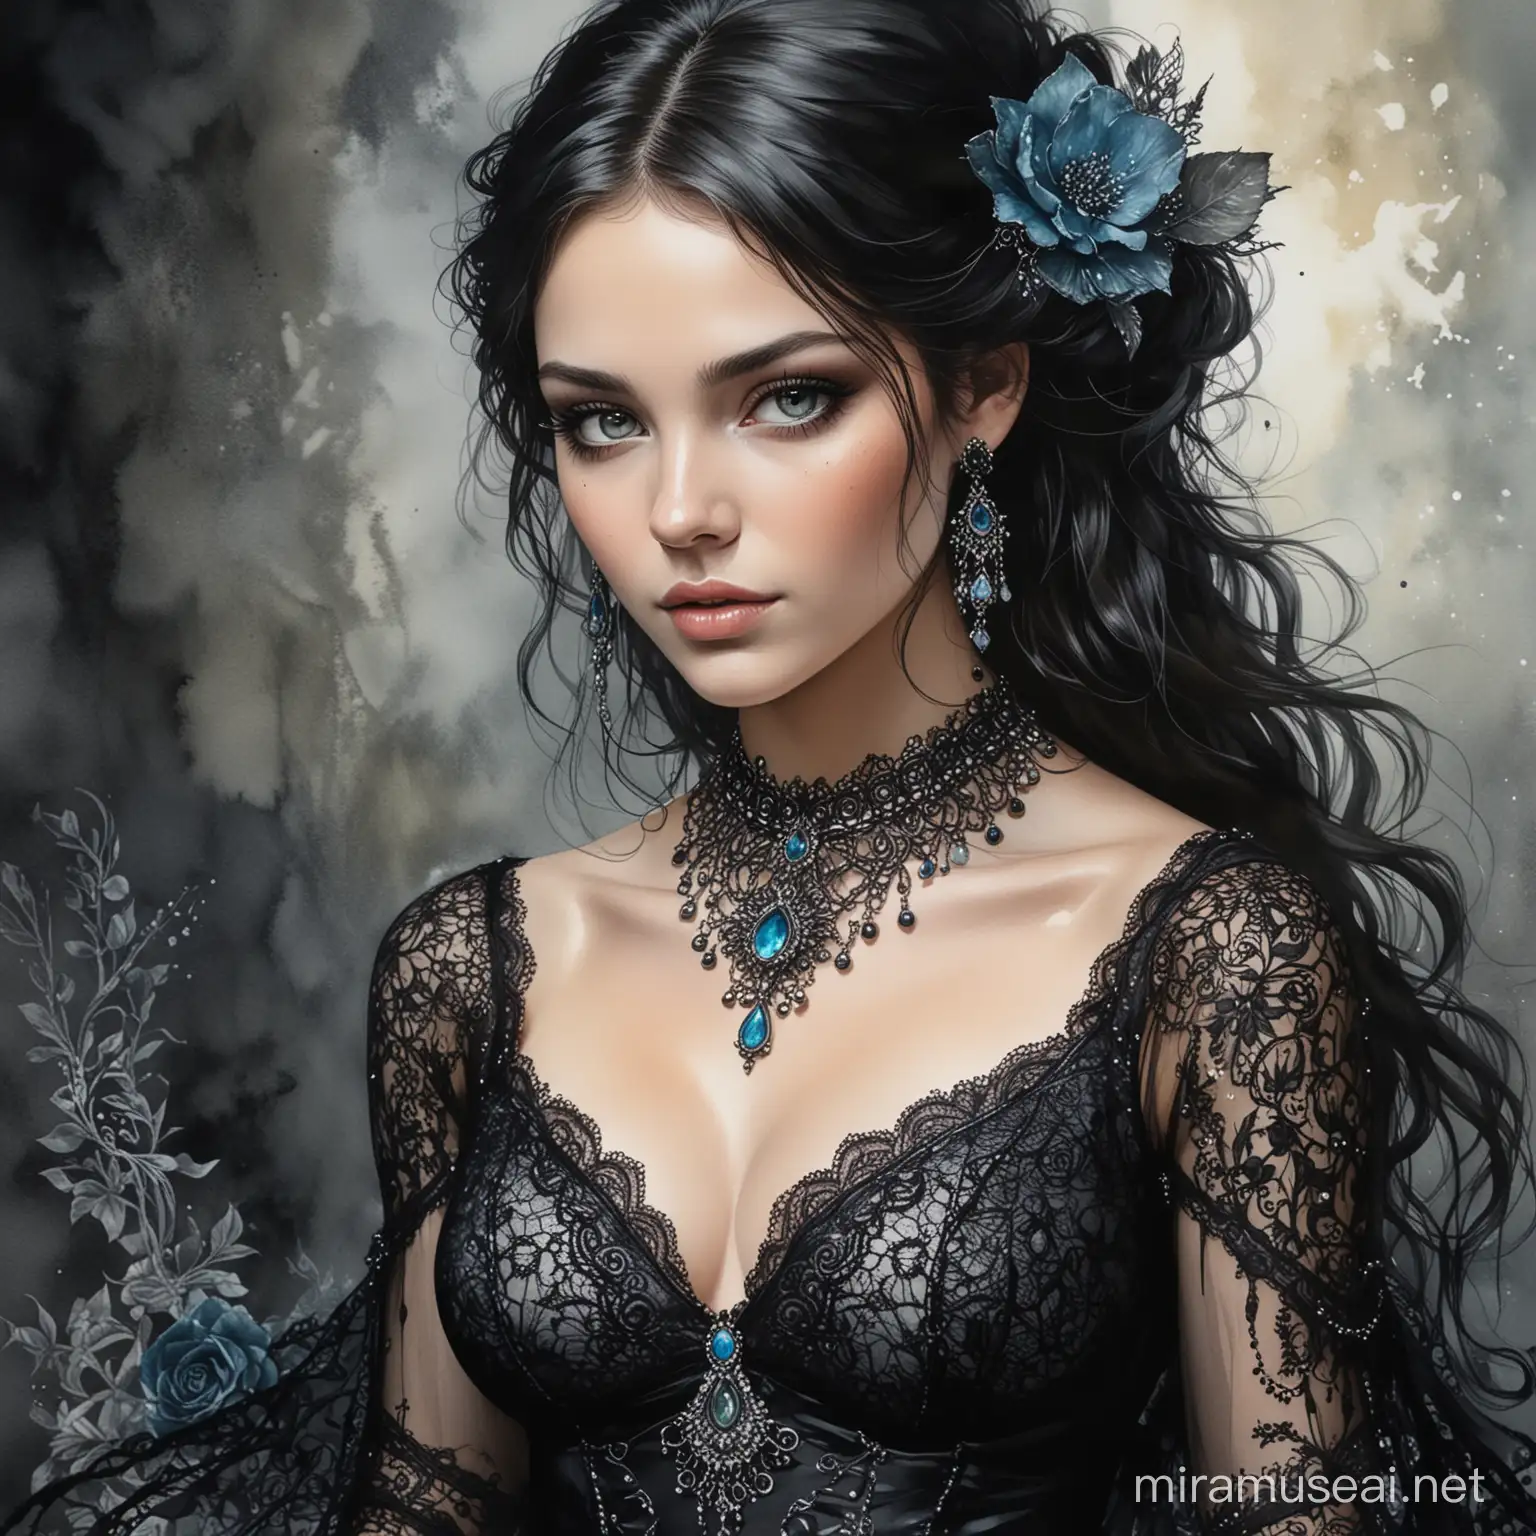 Detailed Fantasy Watercolor Painting of Enchantress Morgan La Fae with Black Lace and Silver Jewelry